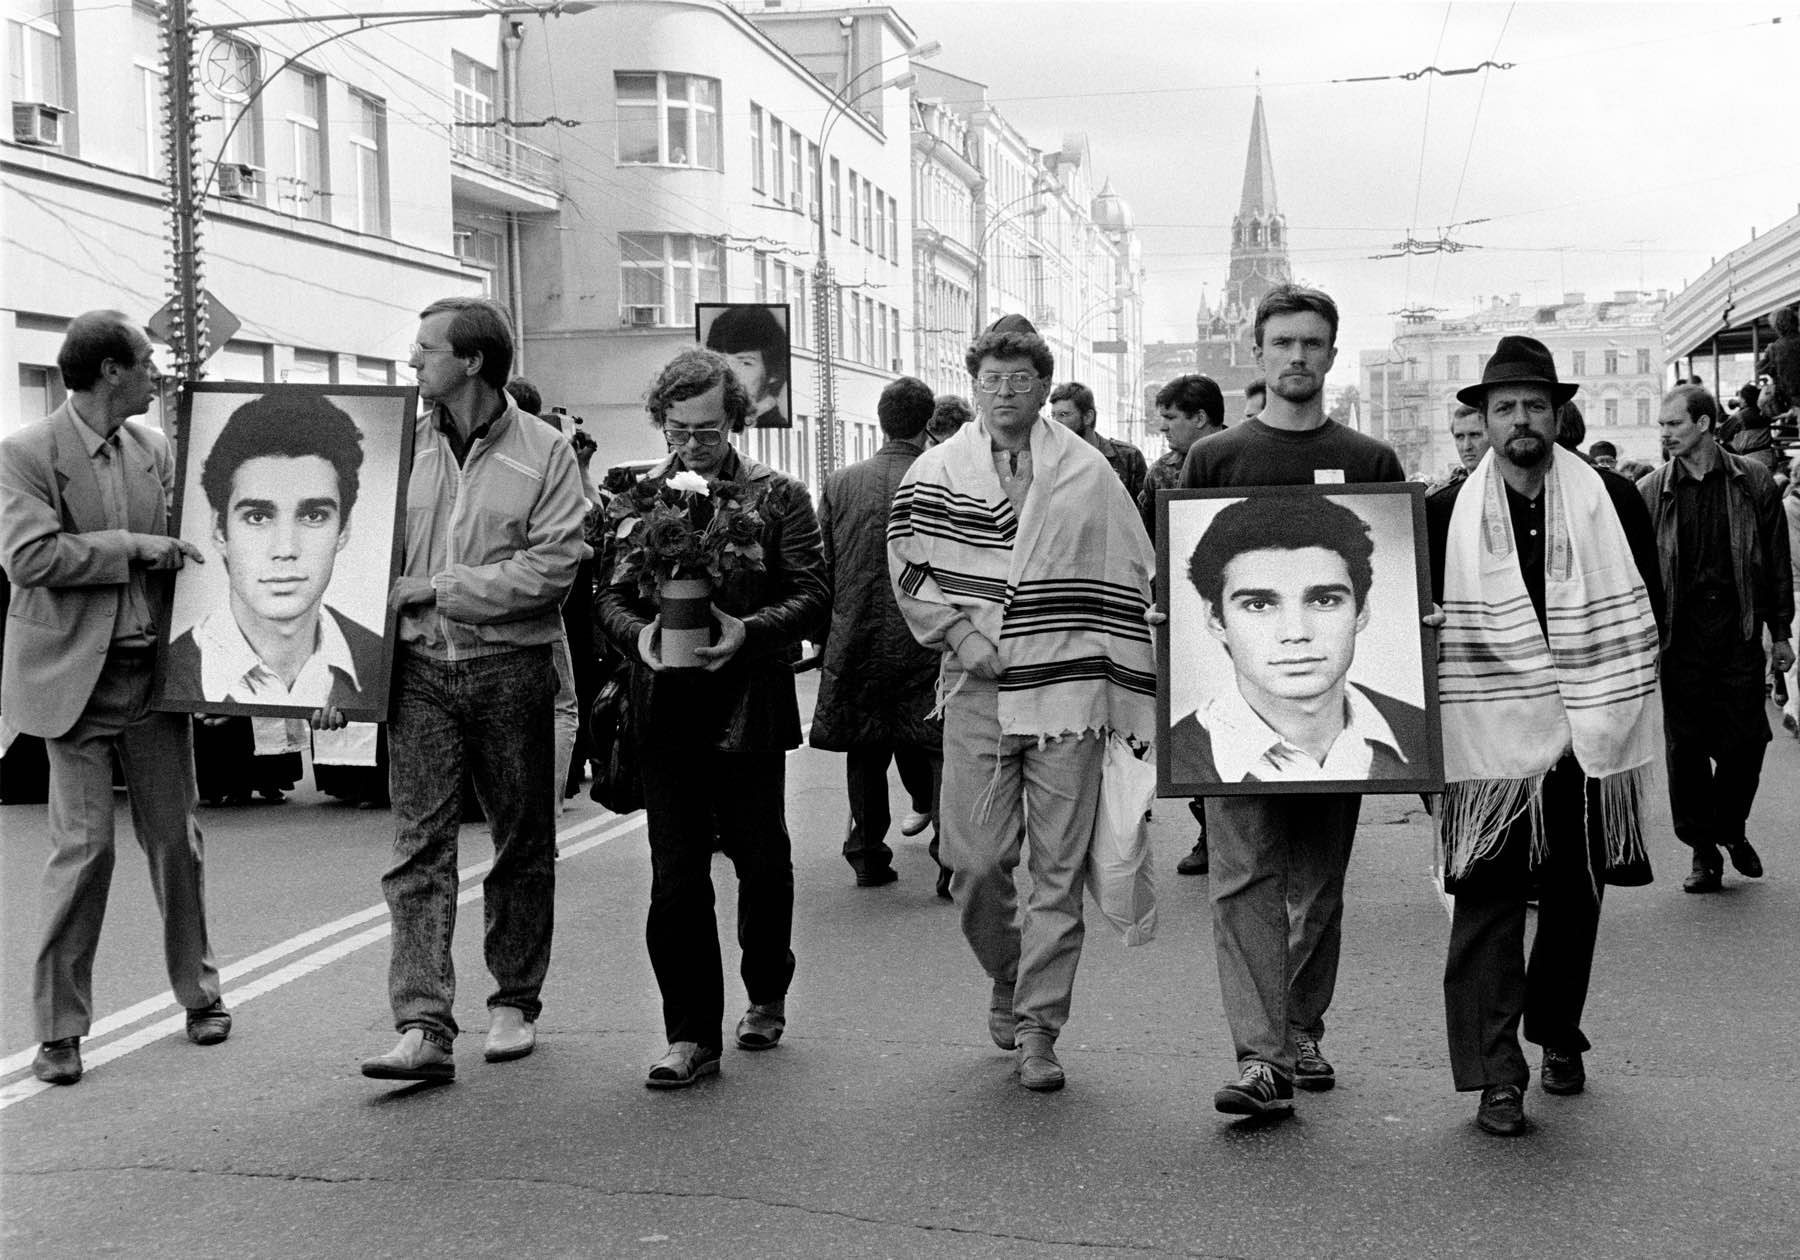 Moscow, 25.08.1991. En route to the demonstration, carrying pictures of Ilya Krichevsky, shot dead in the street five days earlier